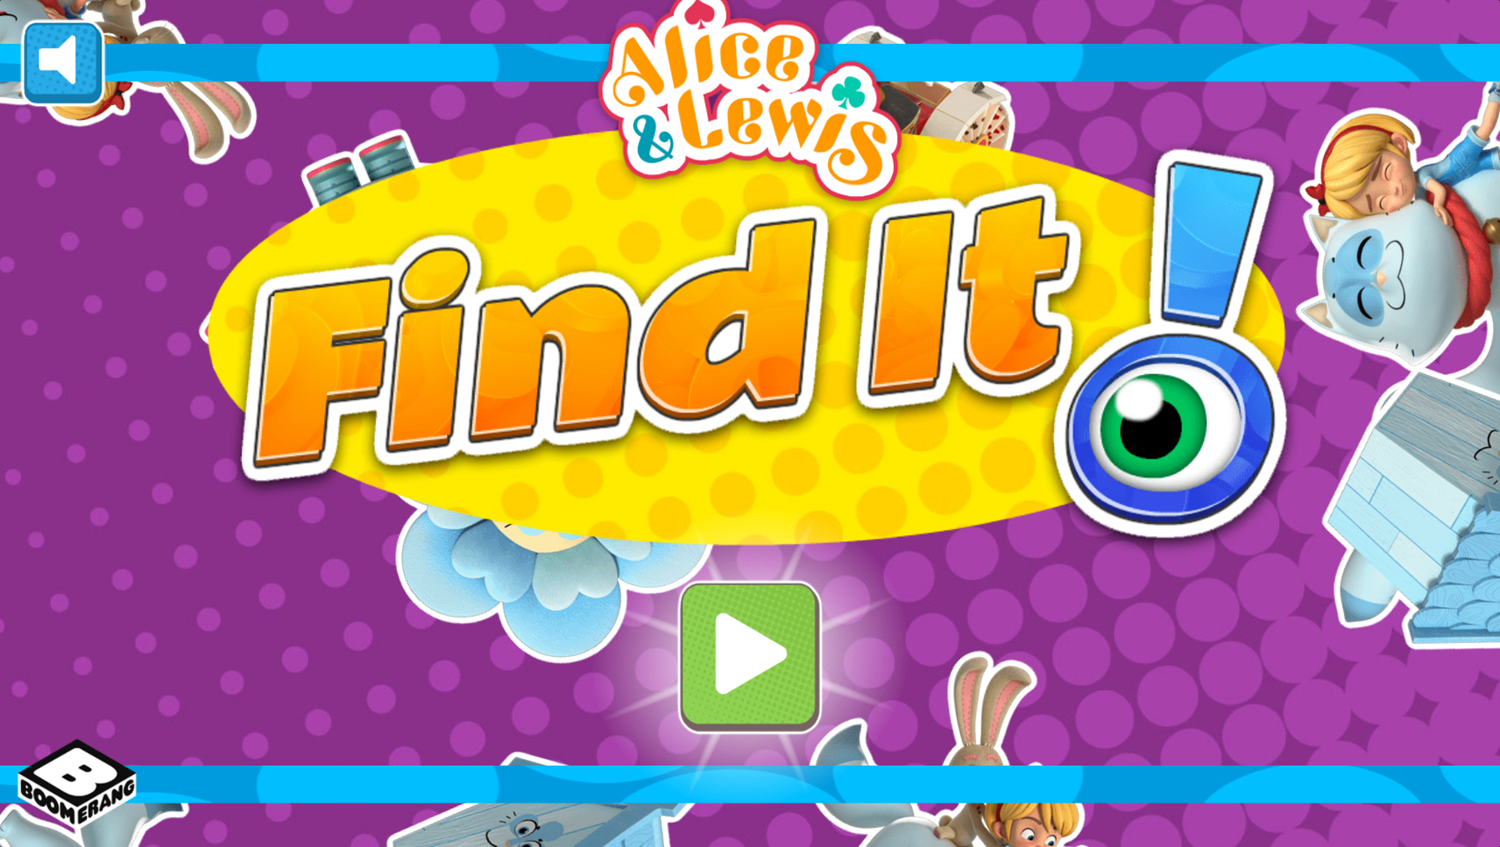 Alice and Lewis Find It Game Welcome Screen Screenshot.